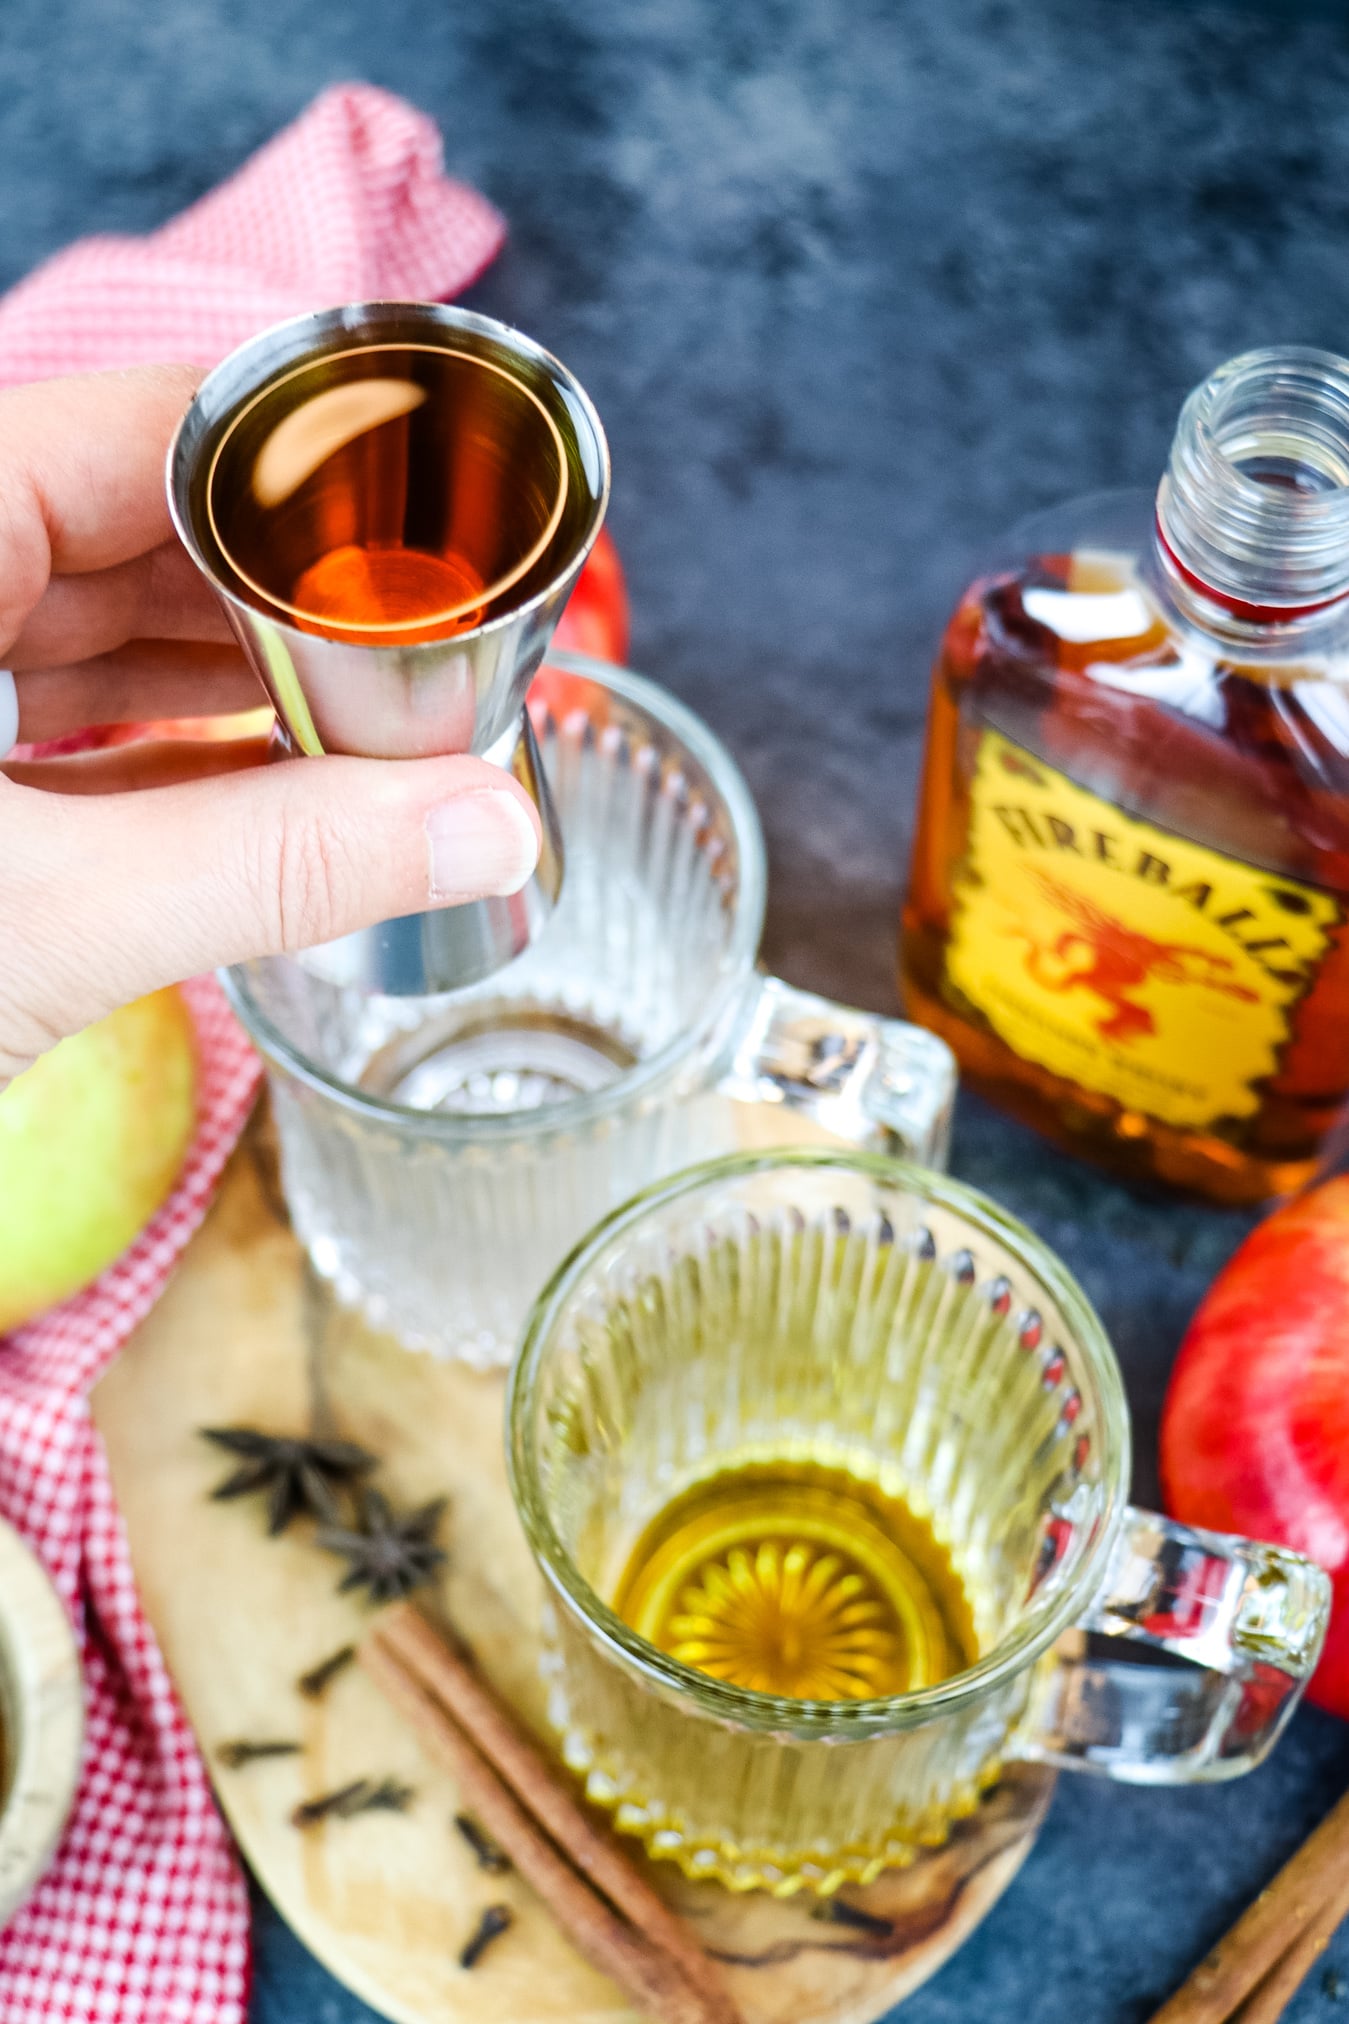 Fireball whiskey being added to mugs for apple cider hot toddy.